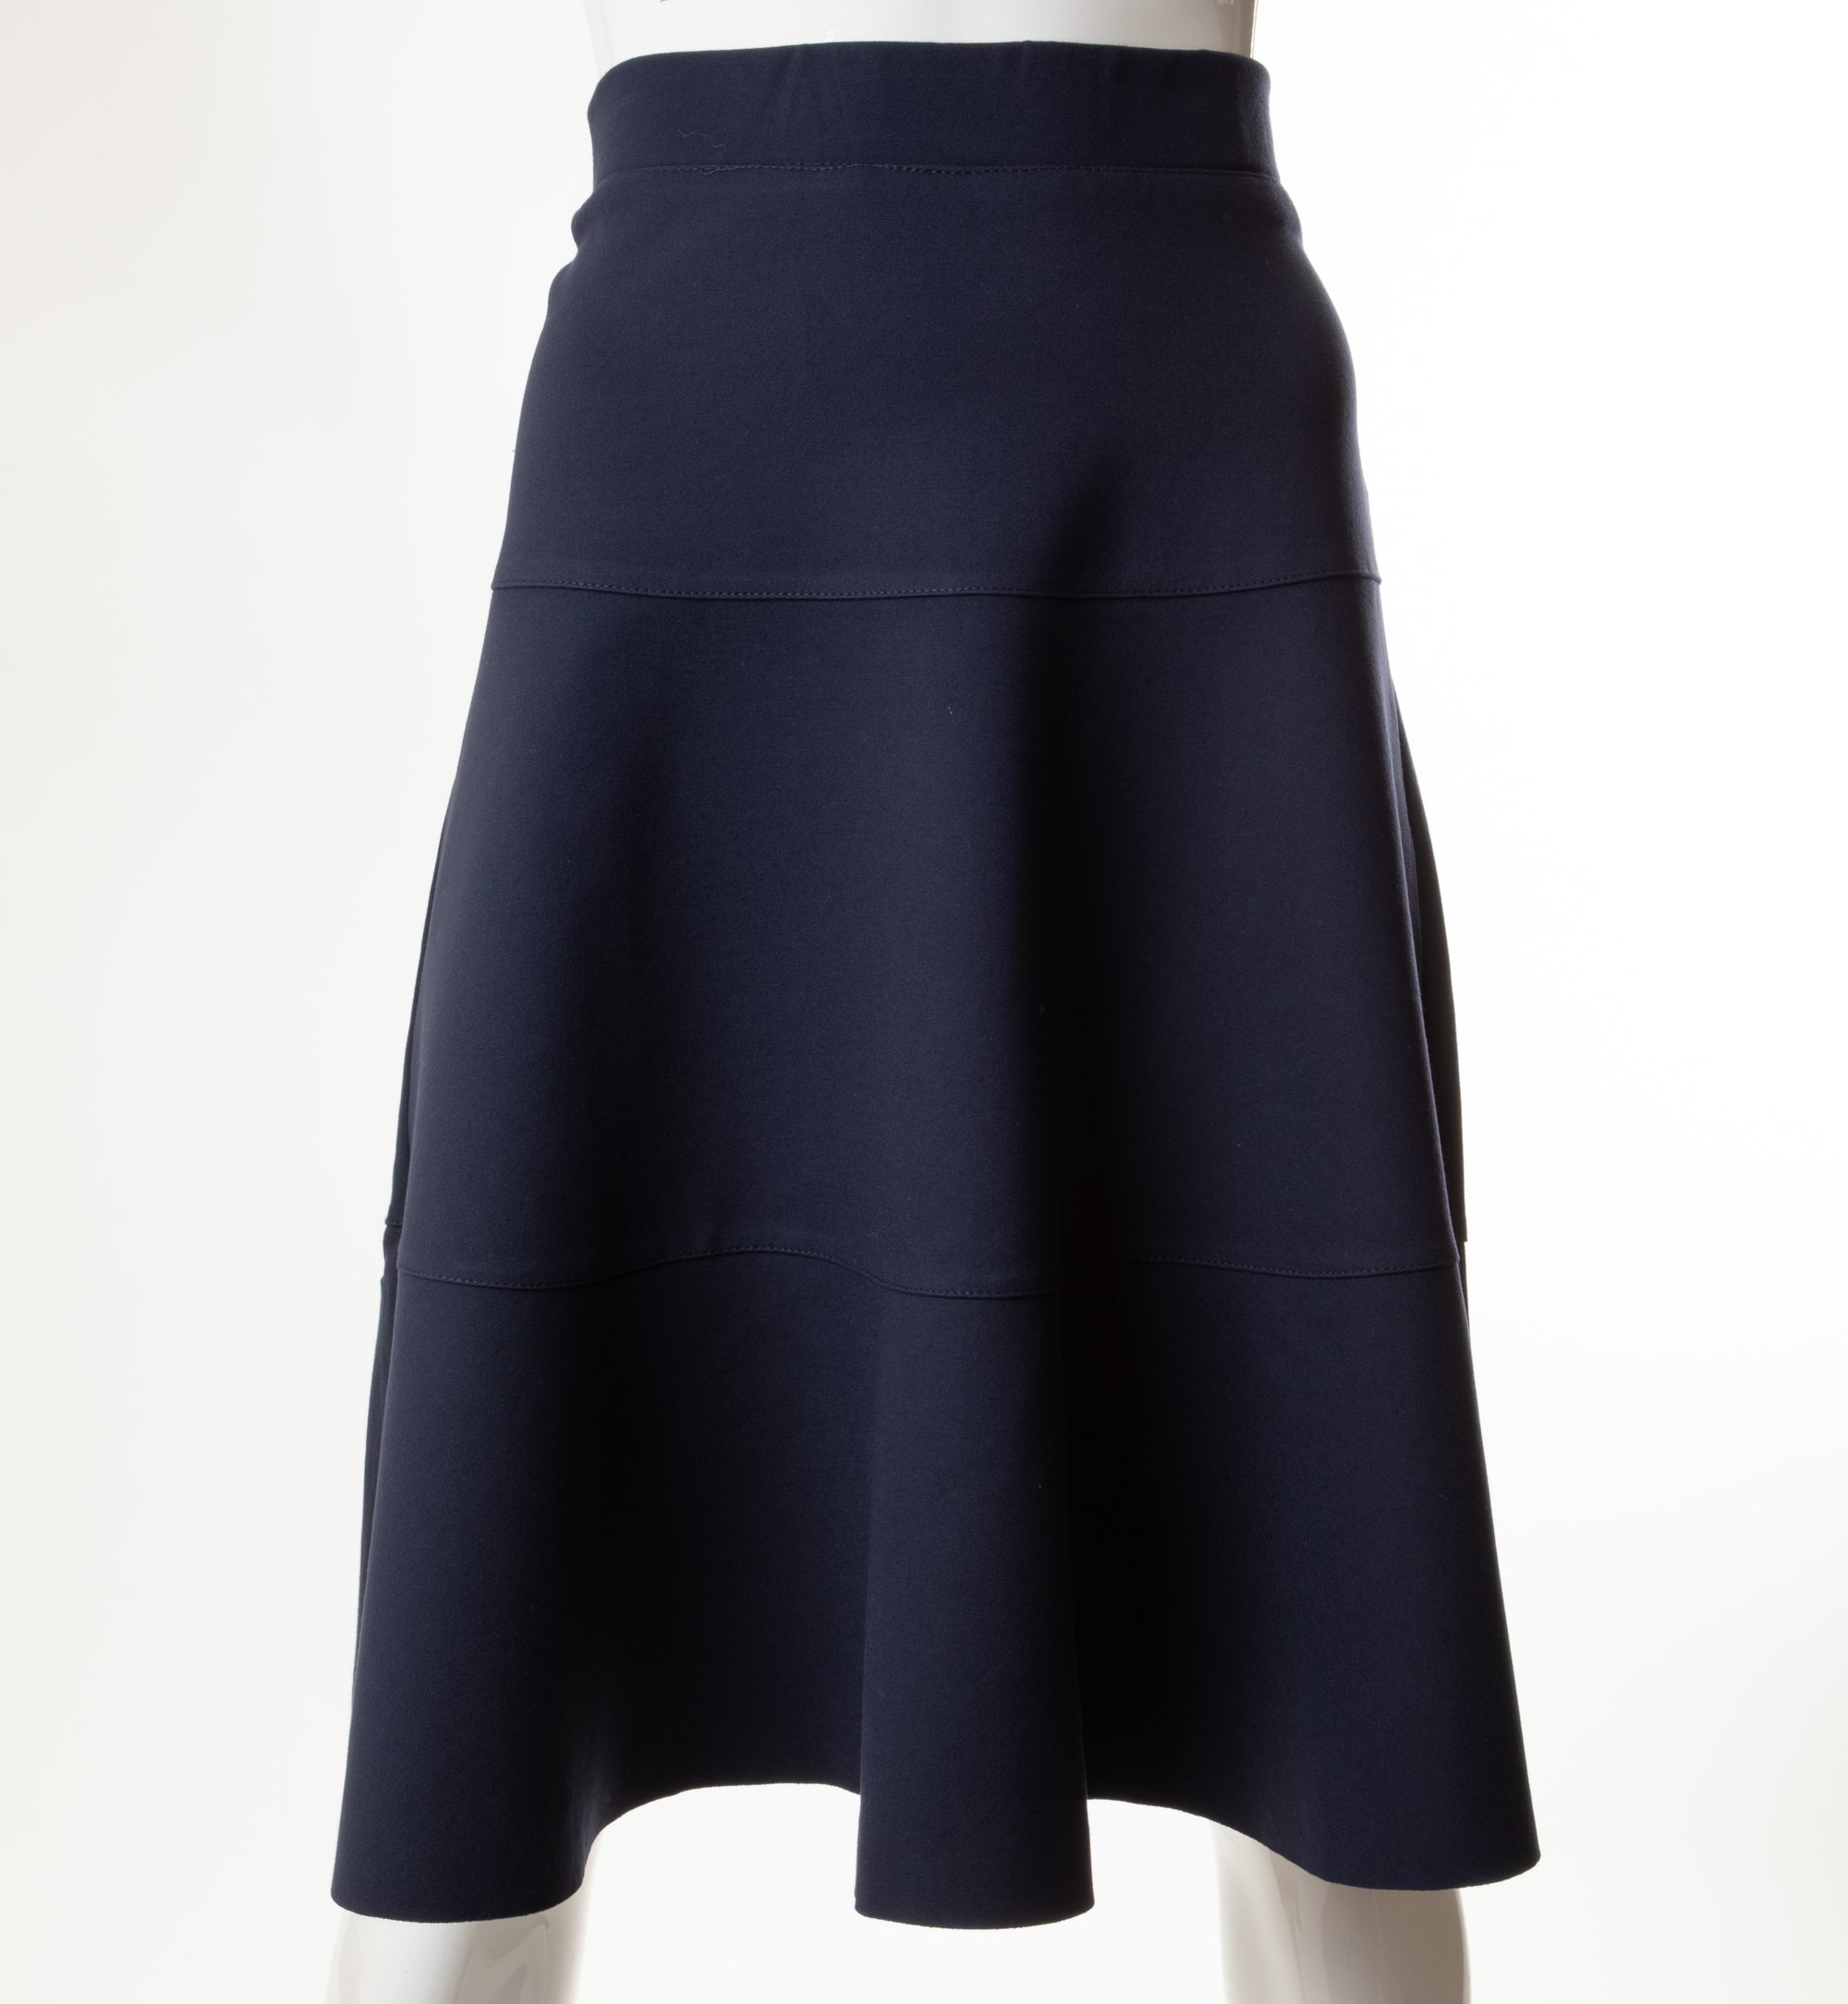 MELI 29 INCHES TIERED PONTE SKIRT NAVY